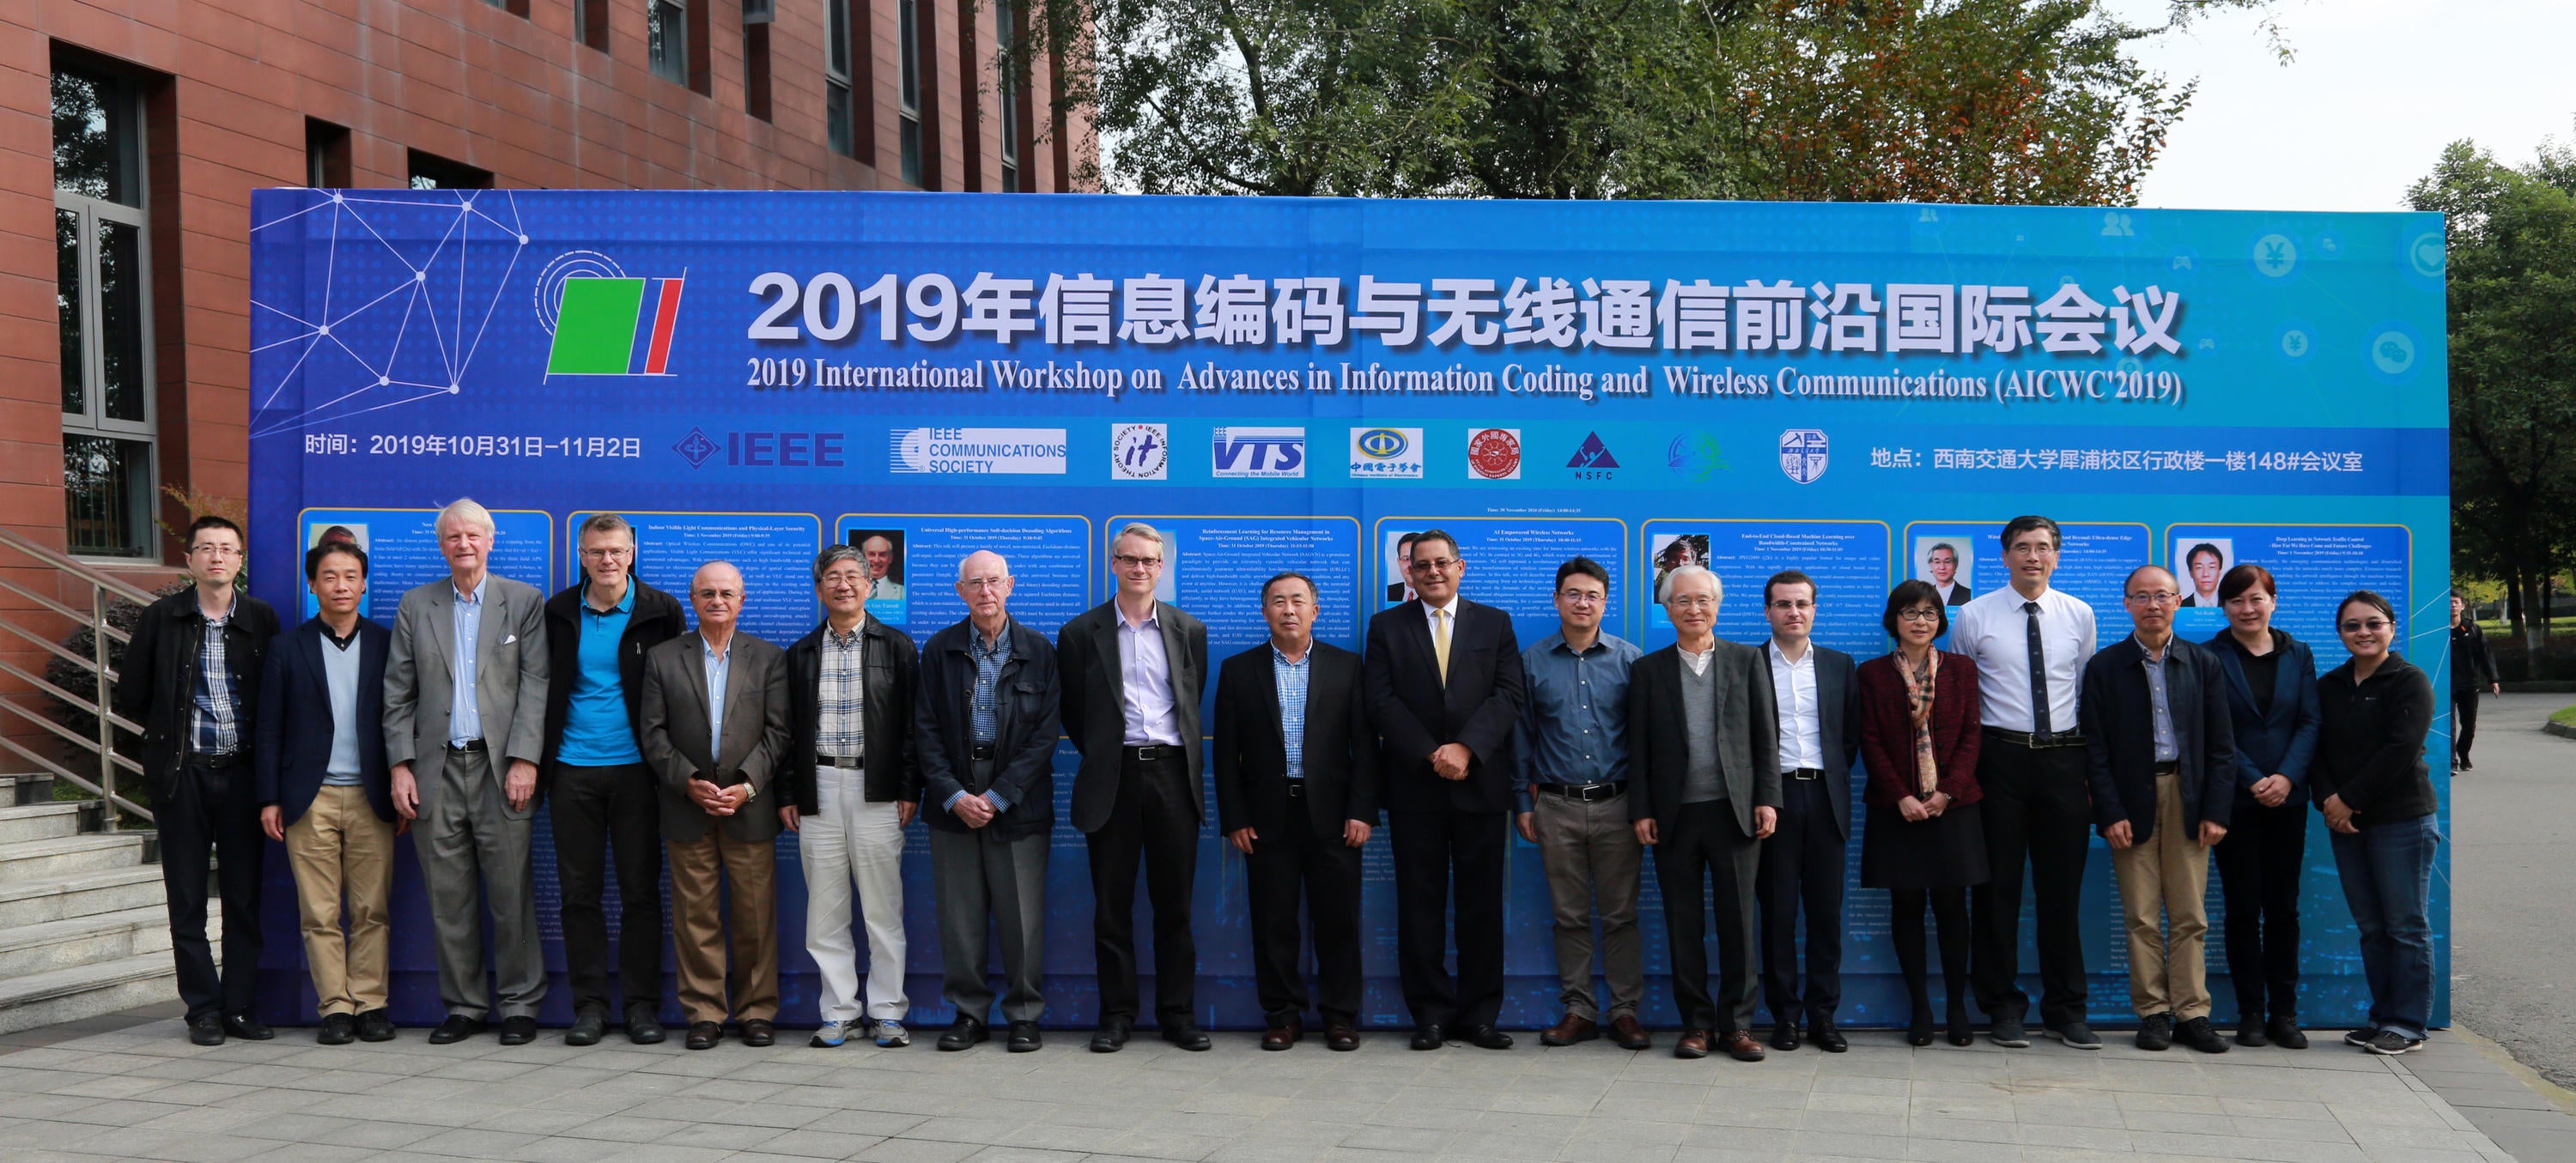 Prof. Shen attended the International Workshop on Advances in Information Coding and Wireless Communications (AICWC' 2019)